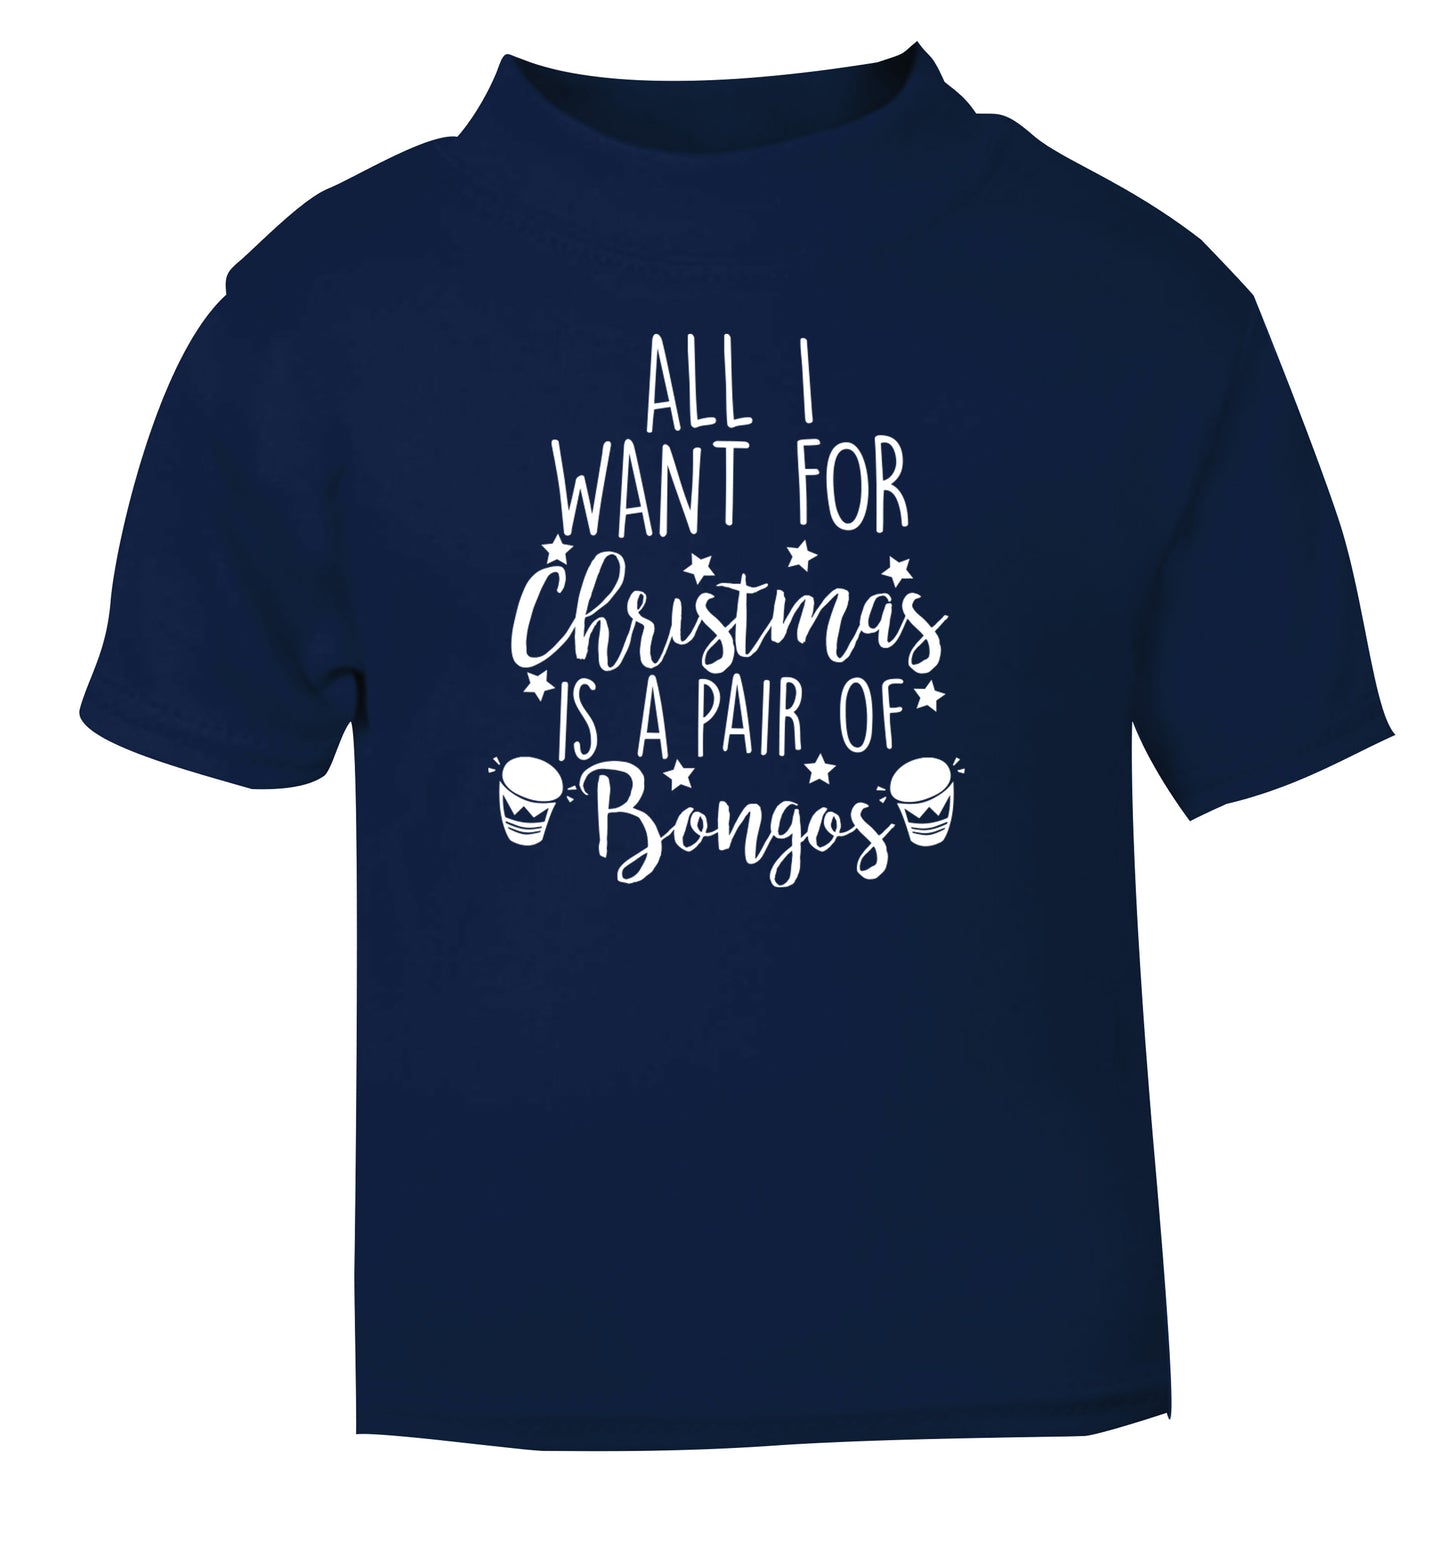 All I want for Christmas is a pair of bongos! navy Baby Toddler Tshirt 2 Years